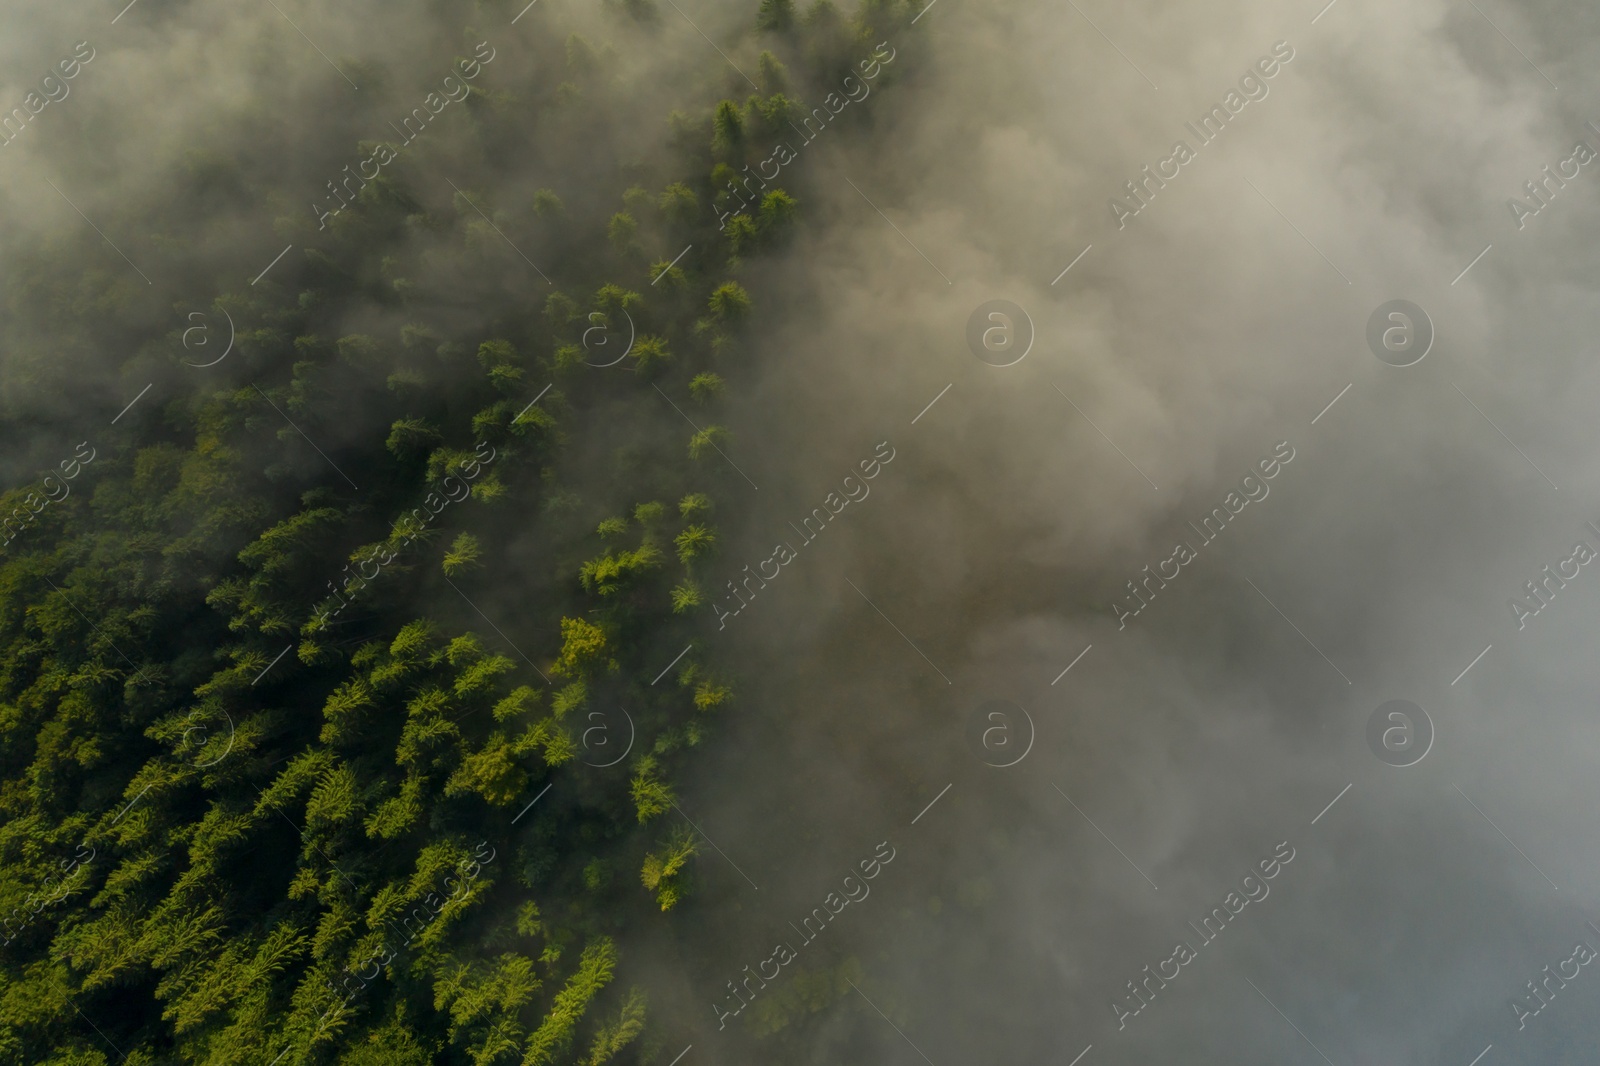 Image of Aerial view of beautiful forest with conifer trees on foggy morning